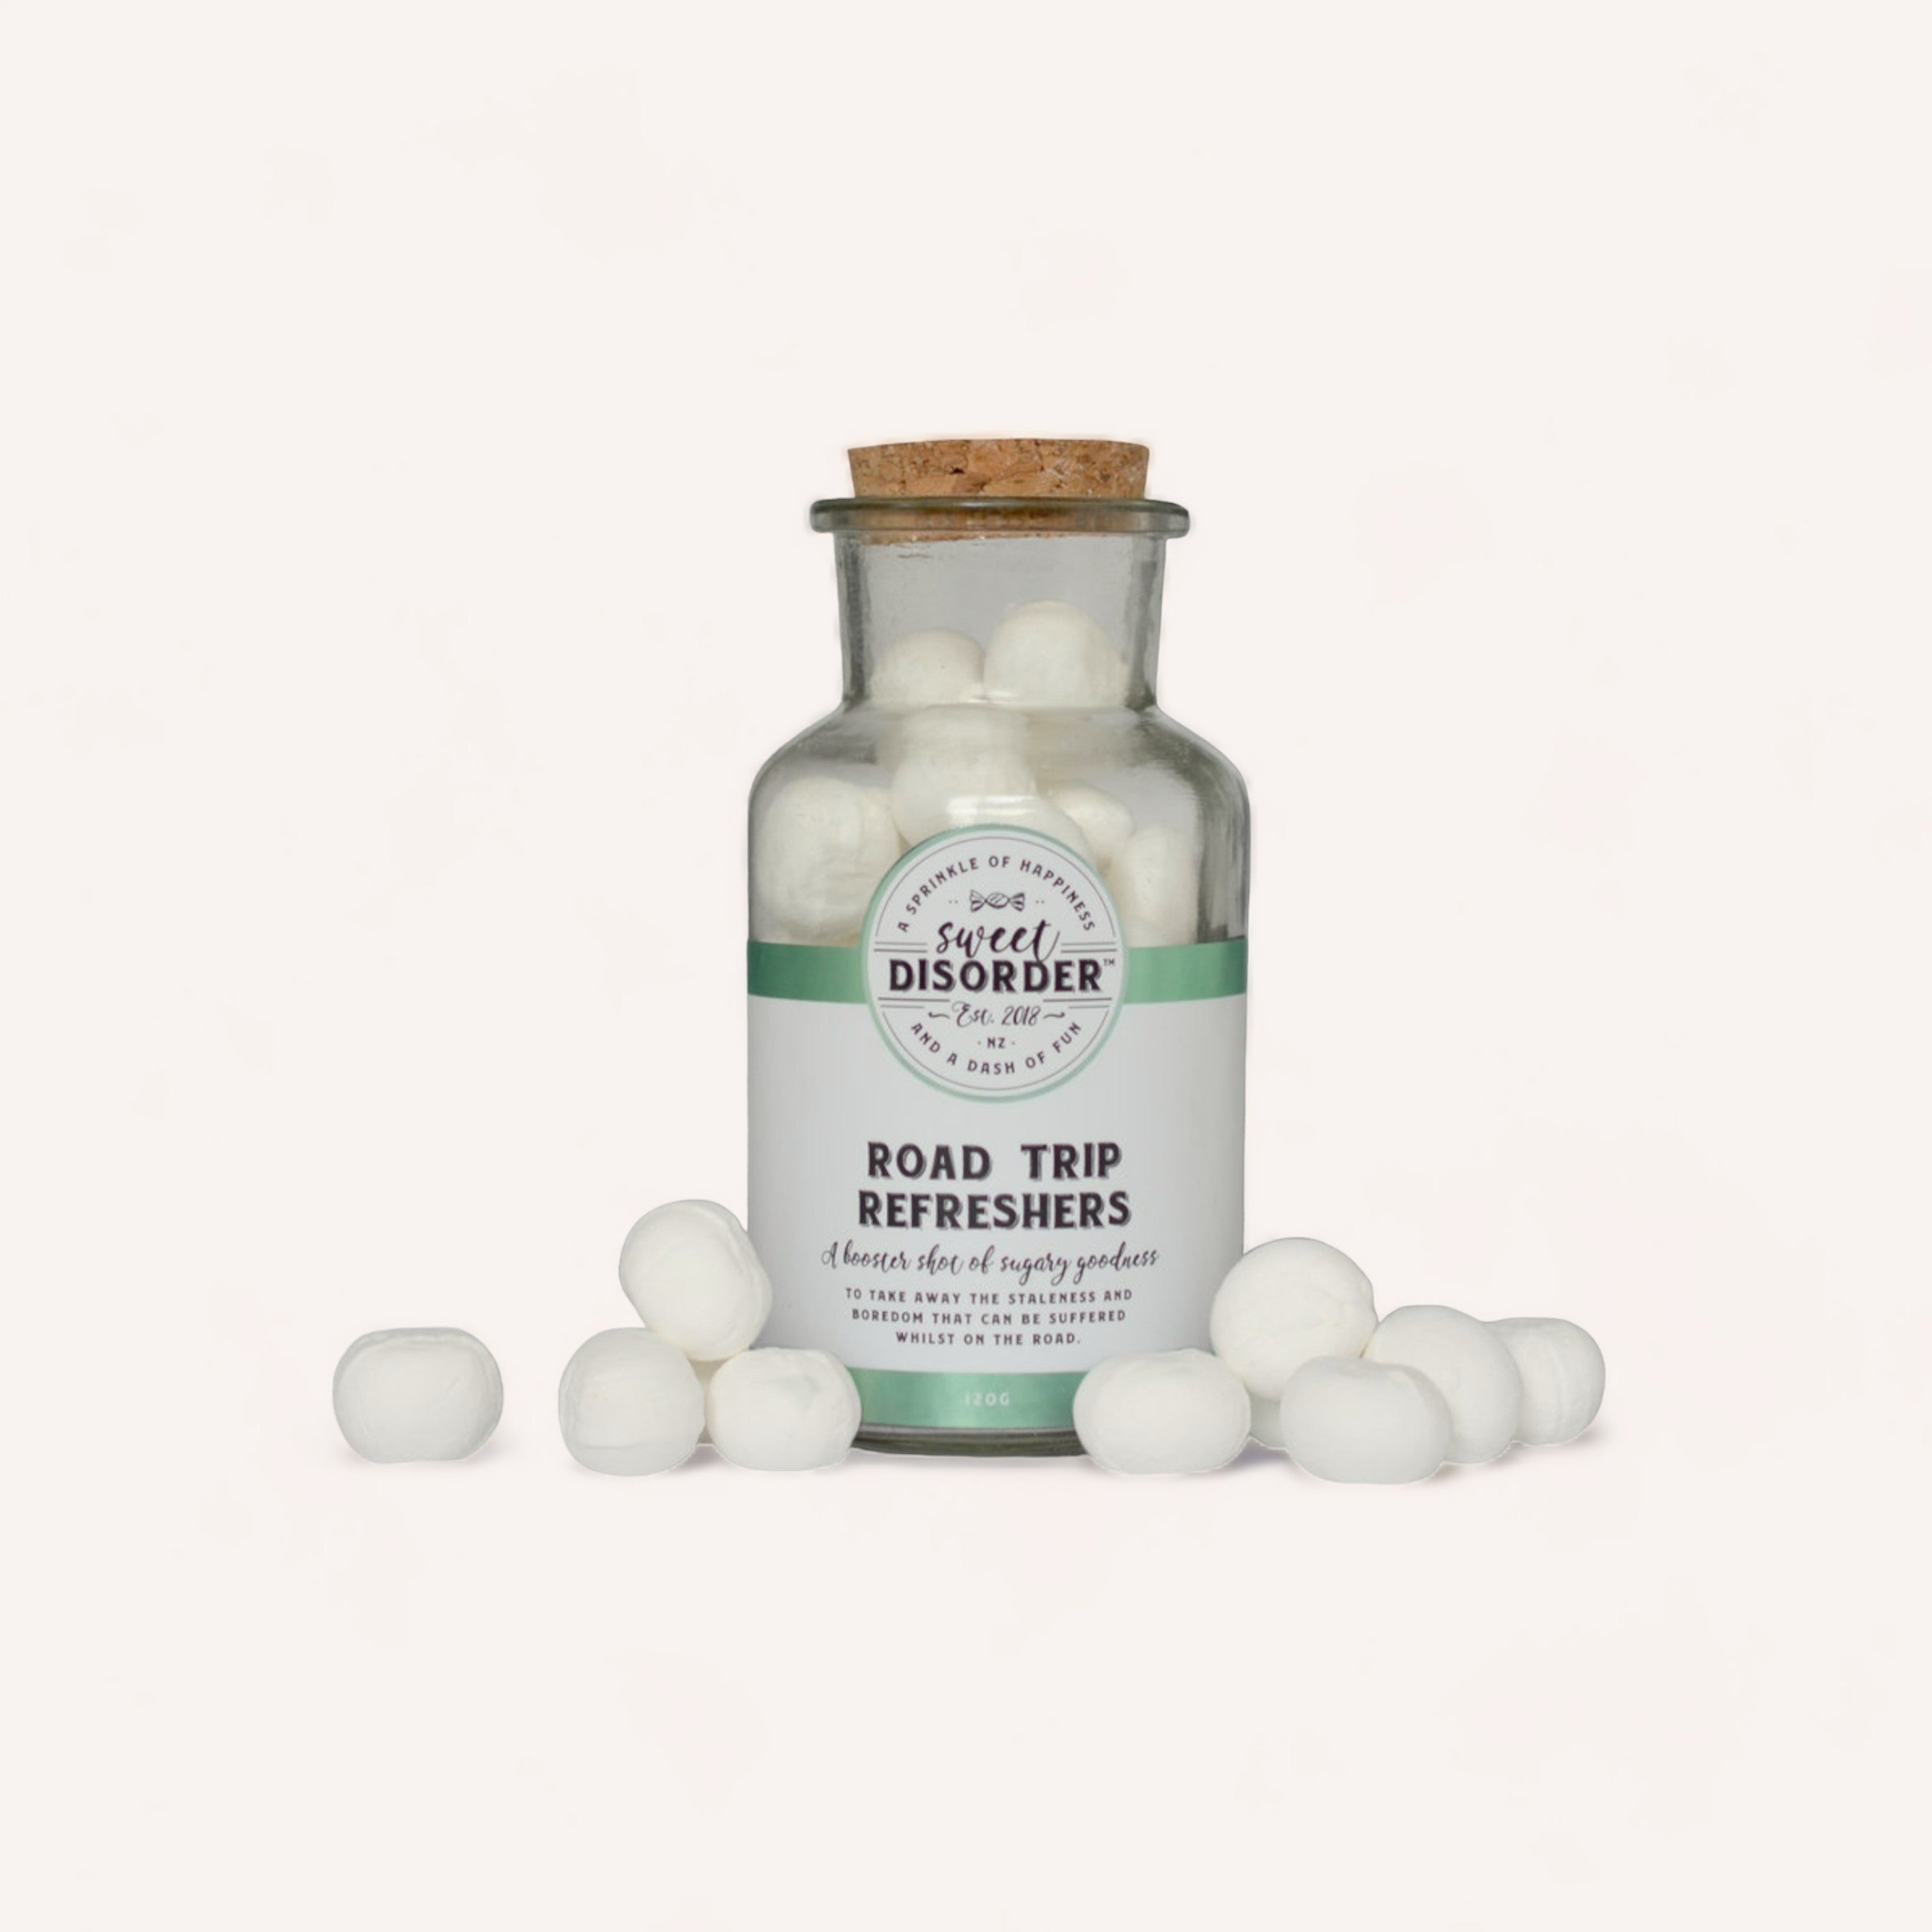 A glass jar with a cork stopper labeled "Road Trip Refreshers Lollies by Sweet Disorder," surrounded by white spherical contents scattered around it on a white background.